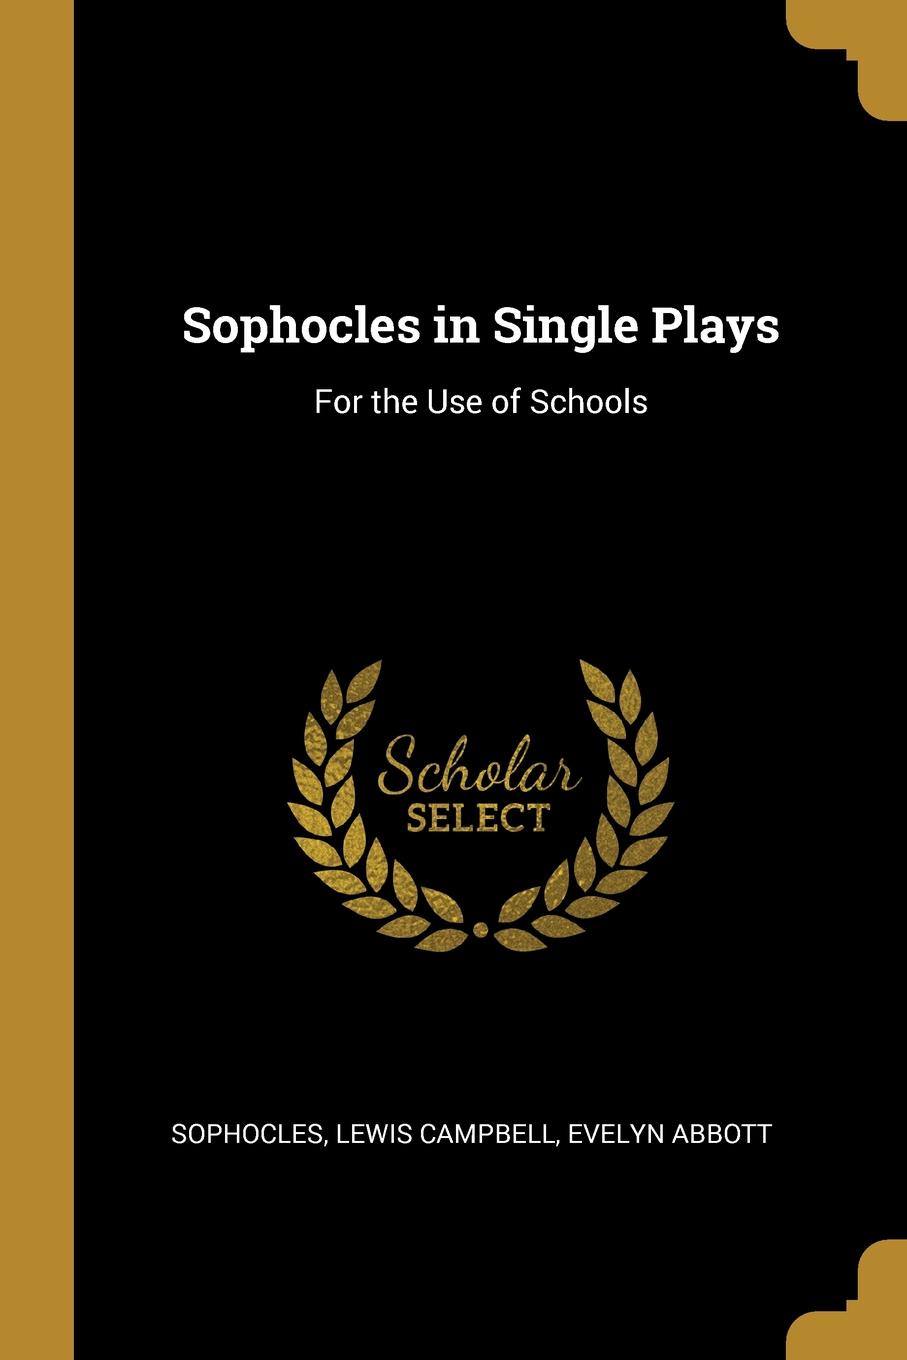 Sophocles in Single Plays. For the Use of Schools